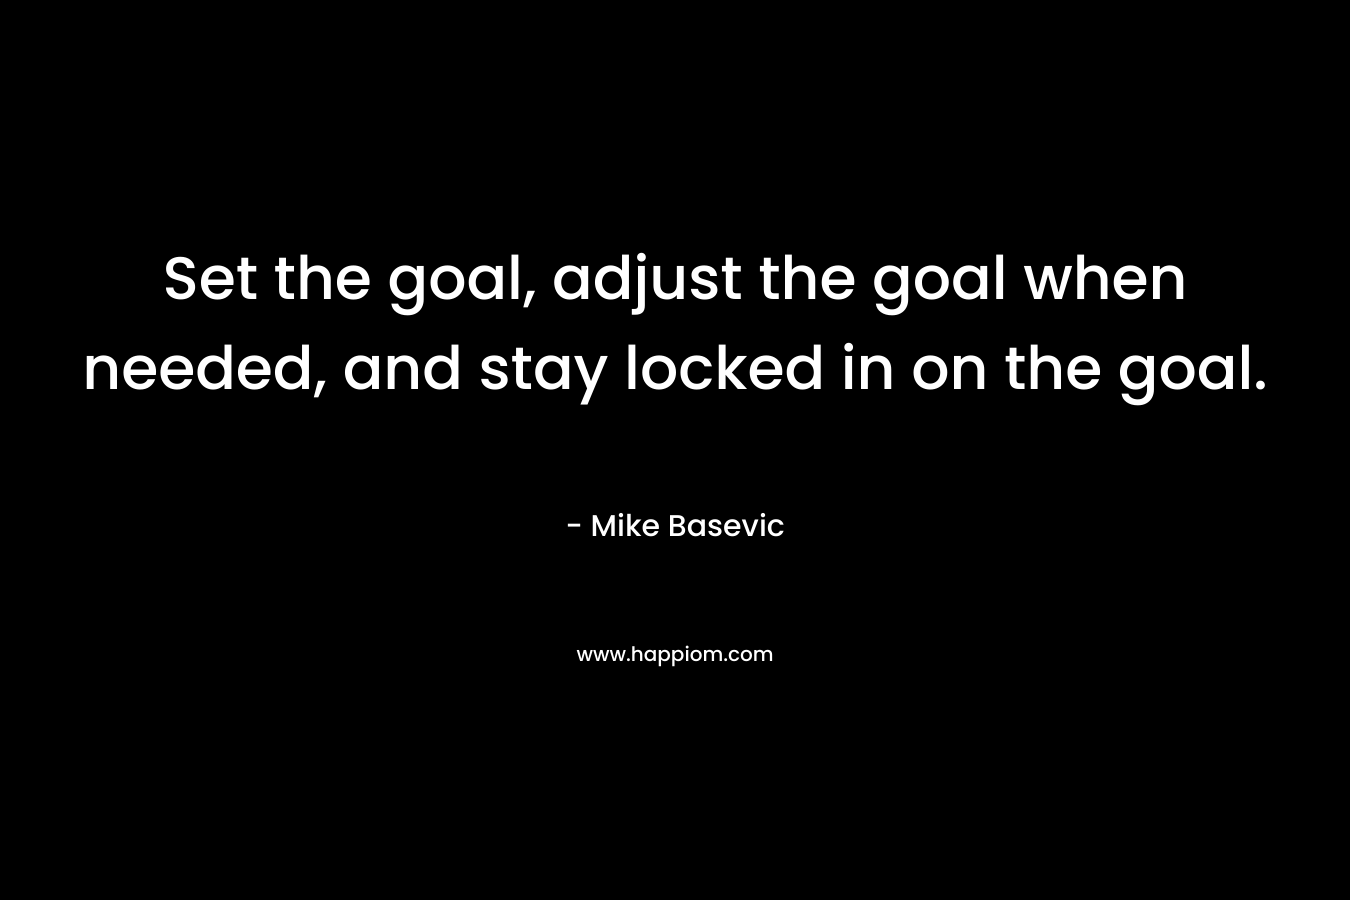 Set the goal, adjust the goal when needed, and stay locked in on the goal.